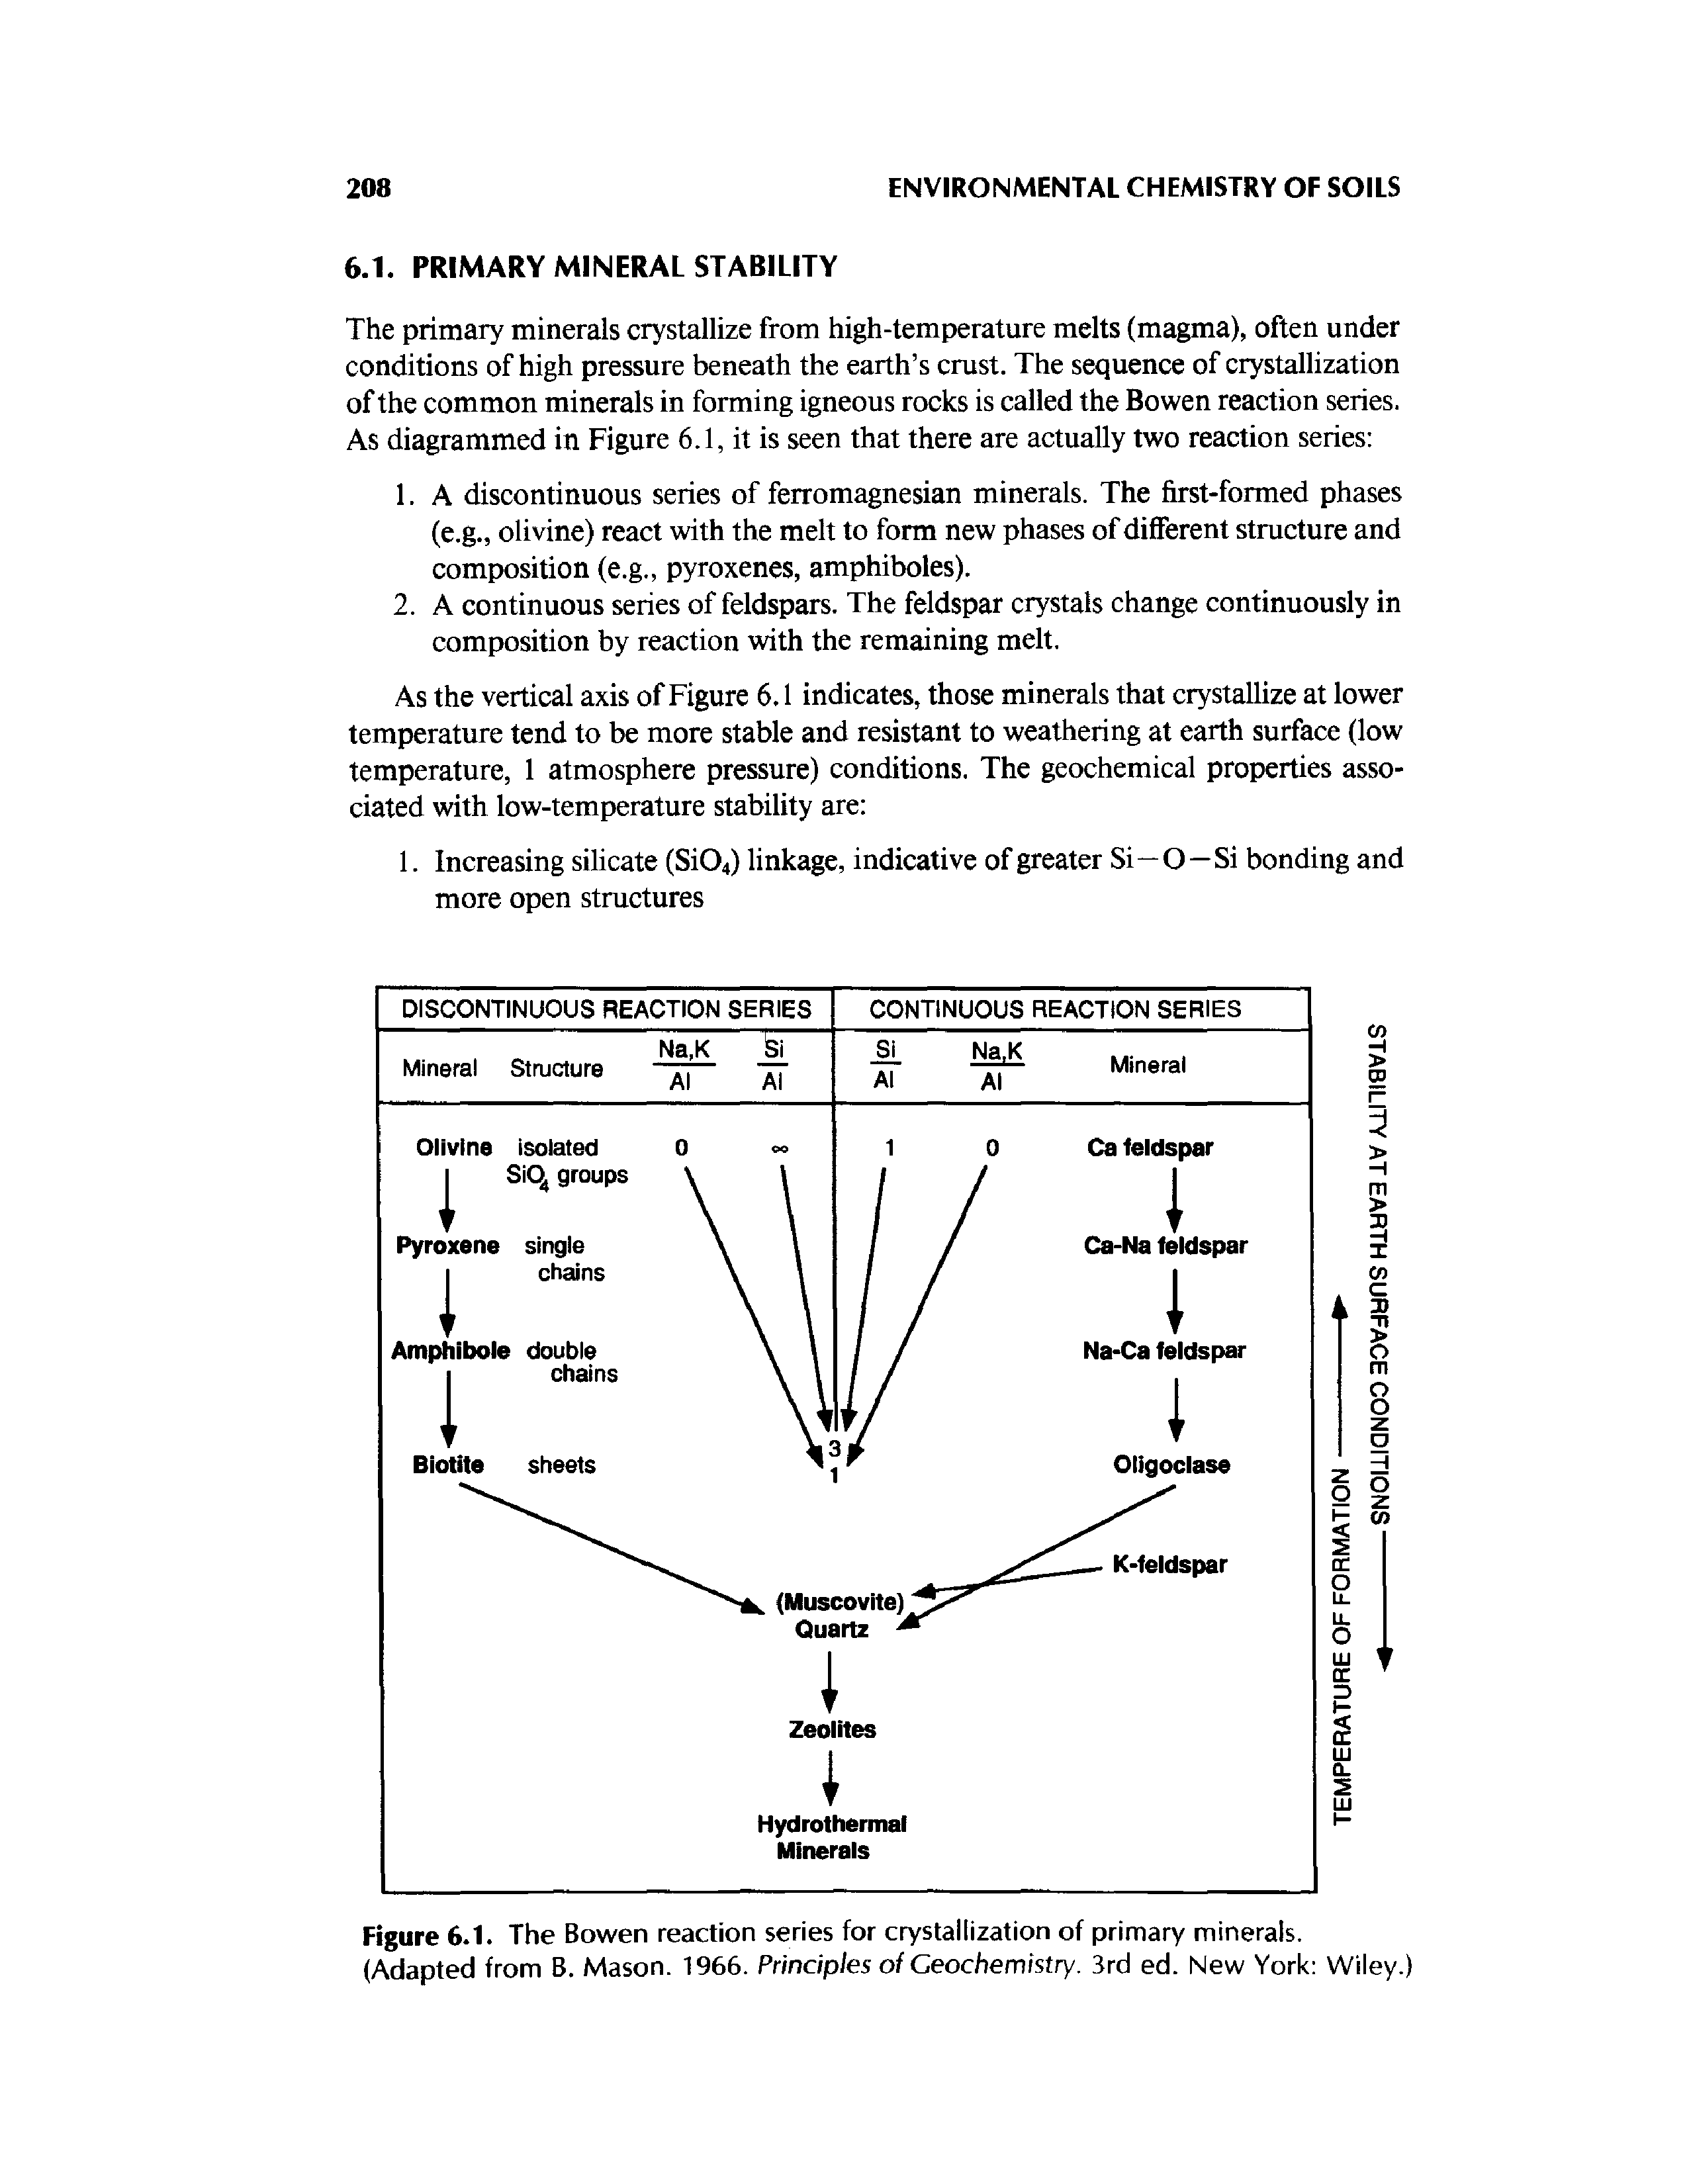 Figure 6.1. The Bowen reaction series for crystallization of primary minerals. (Adapted from B. Mason. 1966. Principles of Geochemistry. 3rd ed. New York Wiley. ...